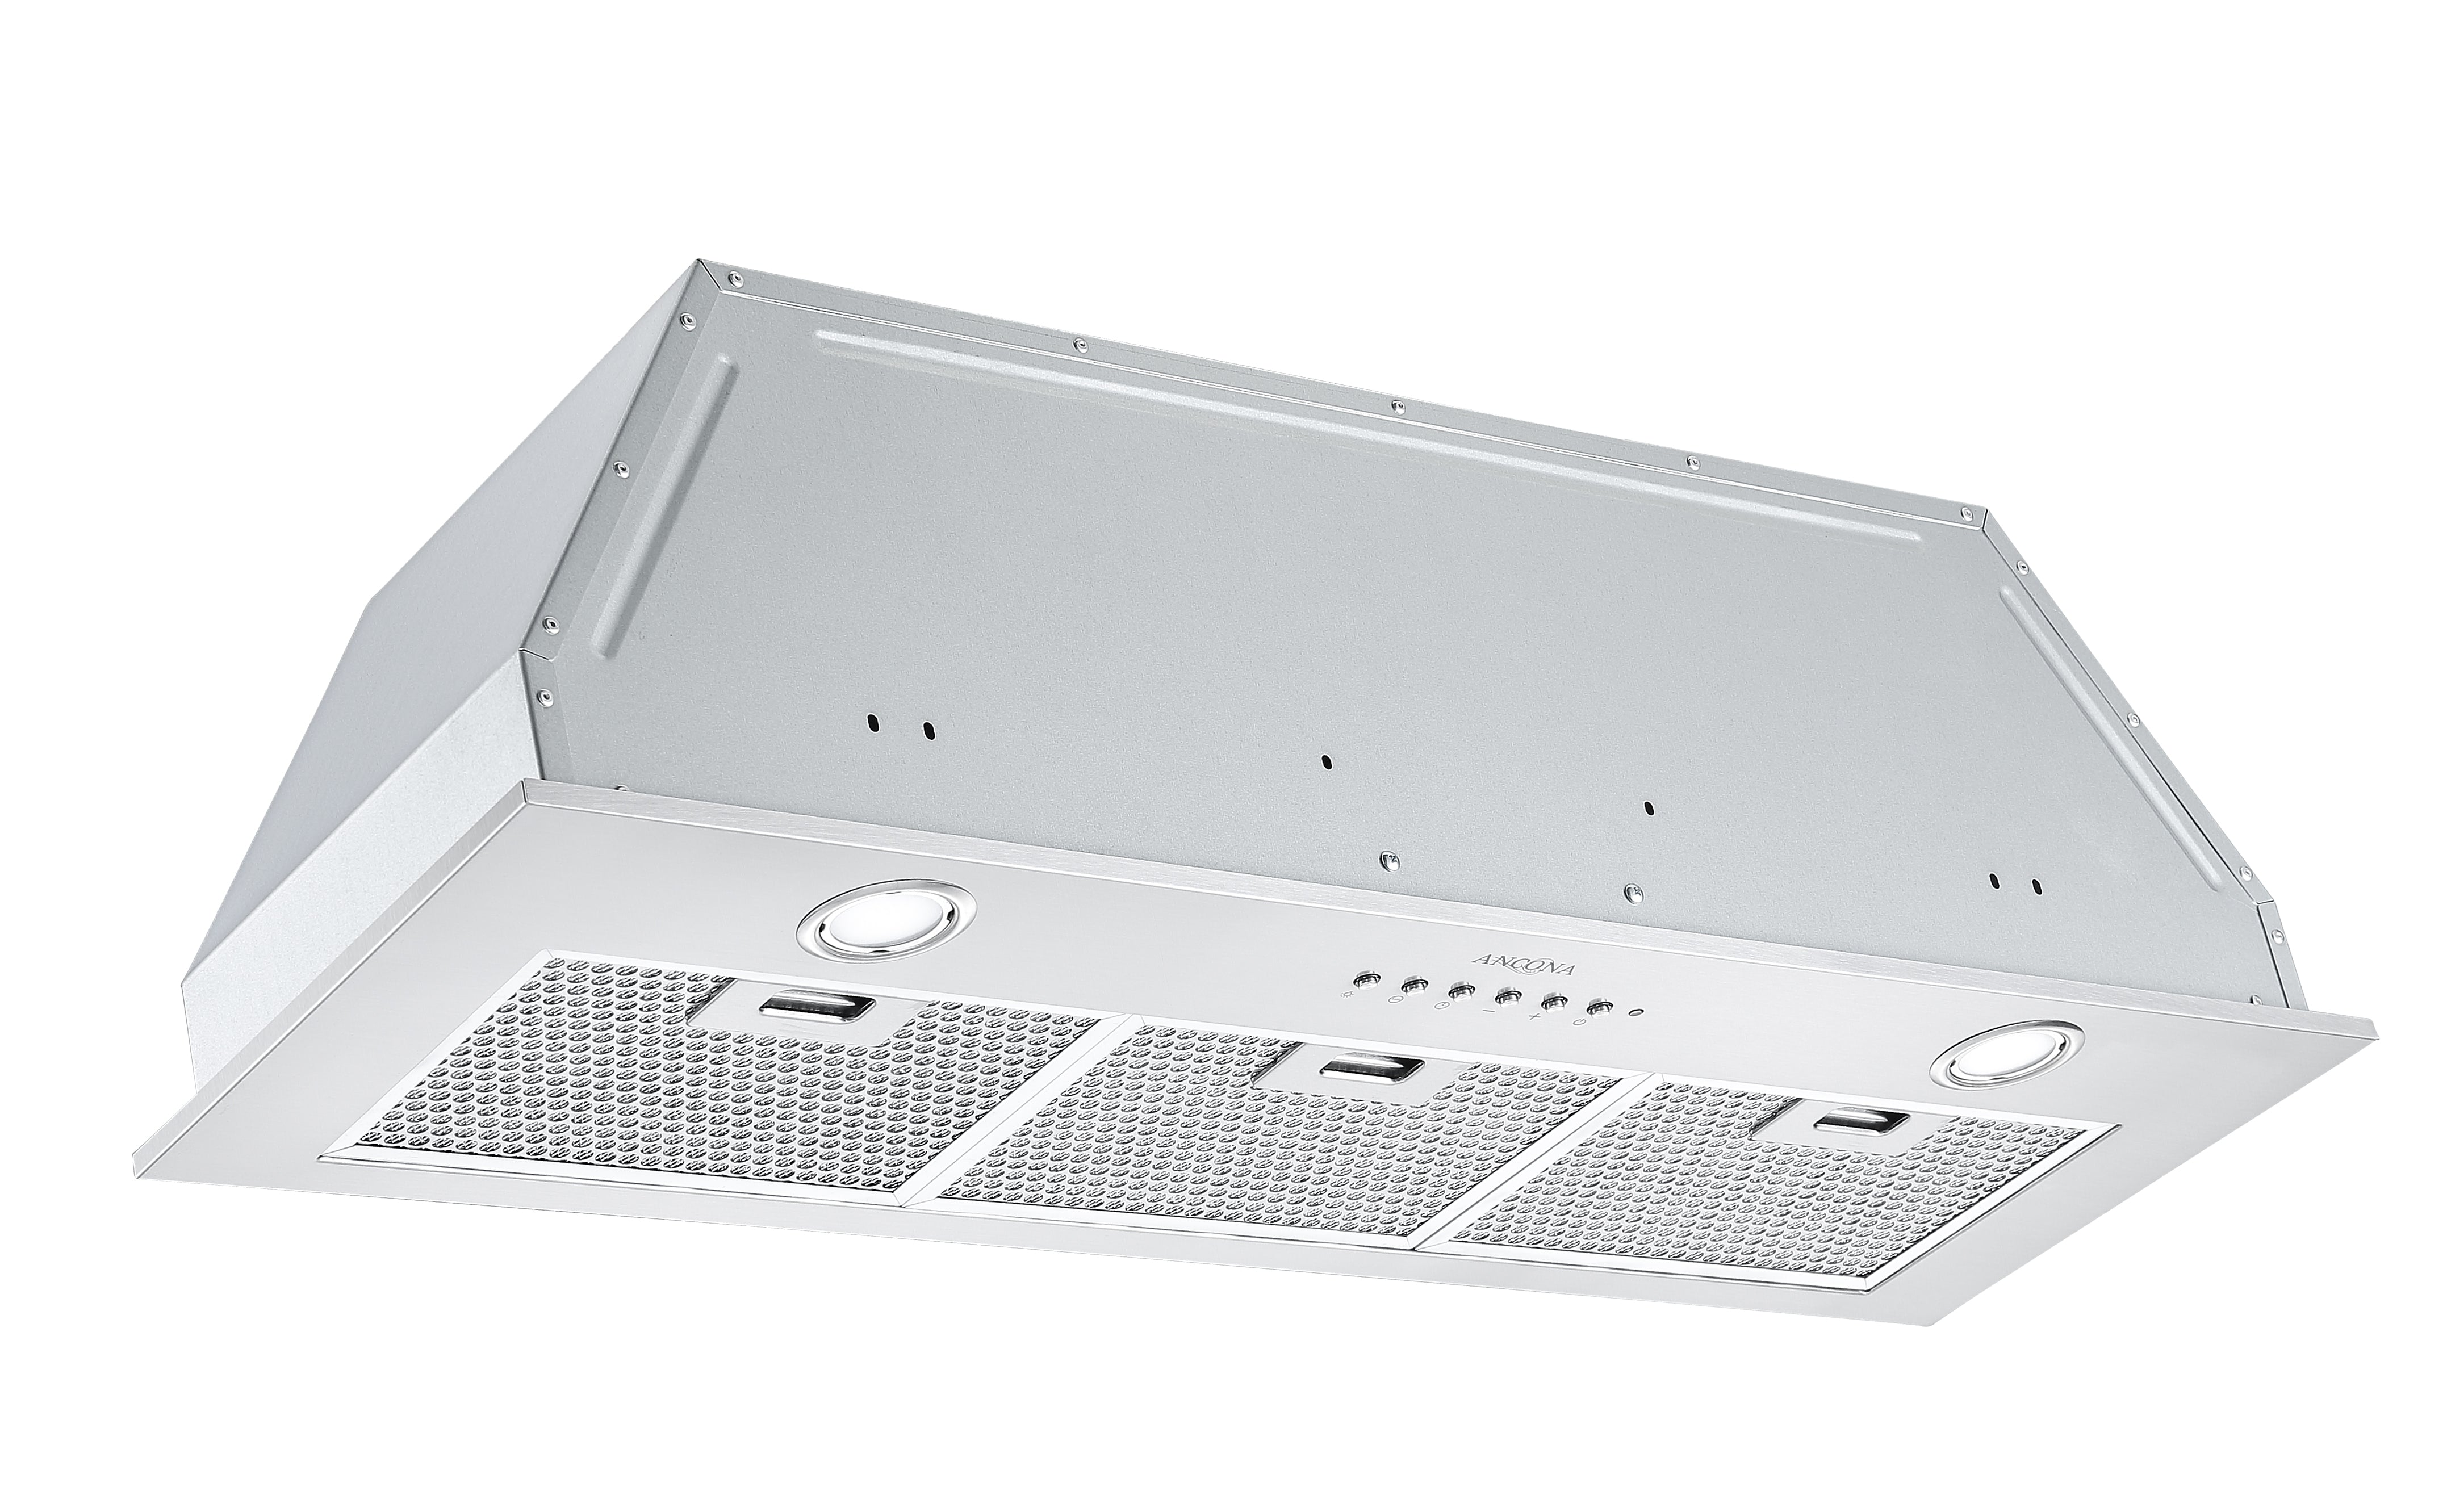 Inserta III 36 in. Built-in Range Hood with Night Light Feature in Stainless Steel